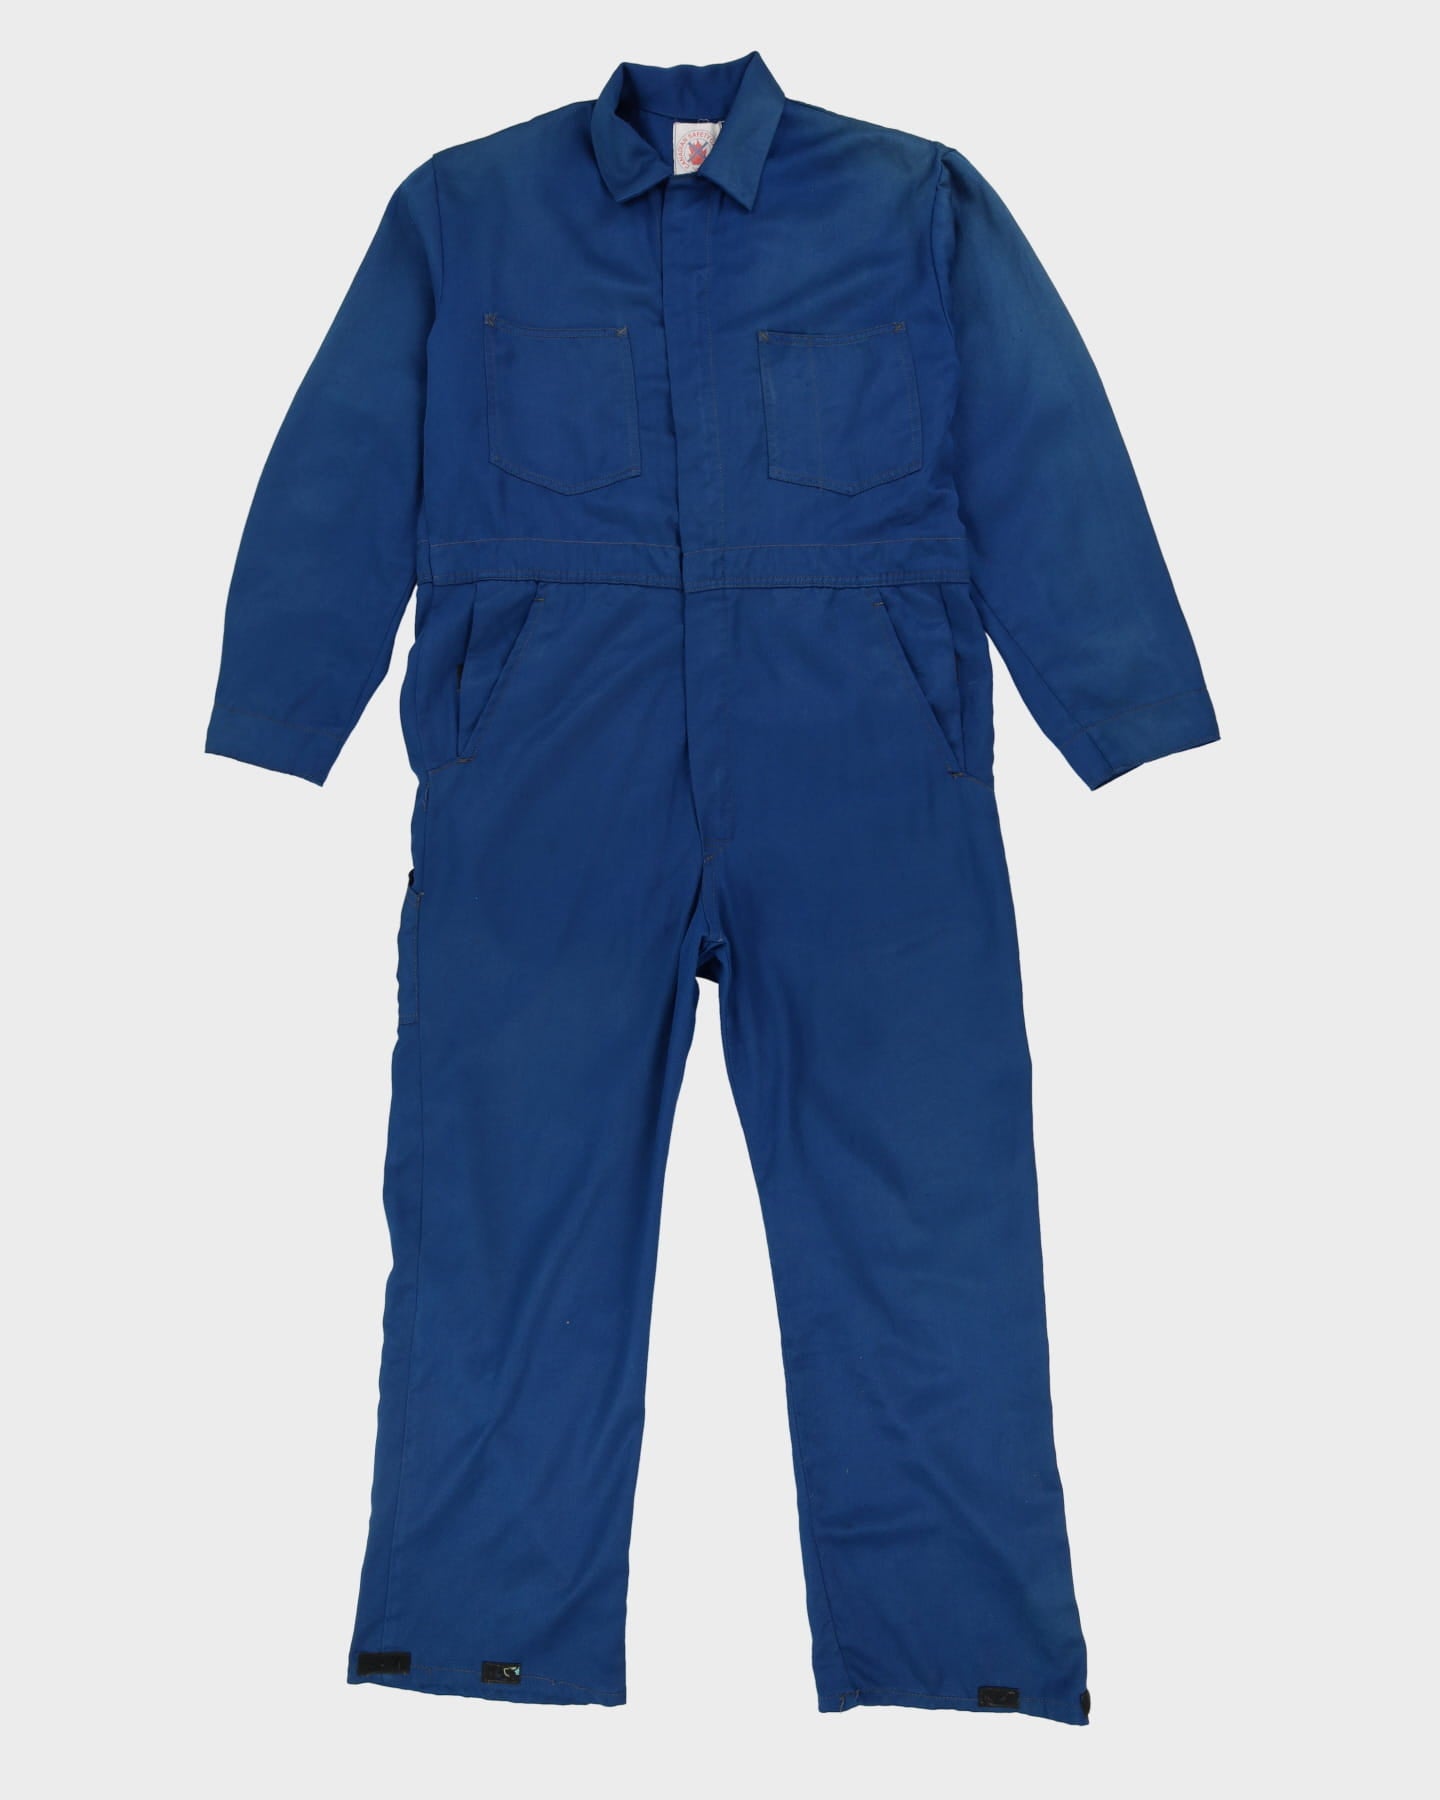 Vintage 80s Spenny-Sun Drilling Services Blue Overalls - 44R – Rokit